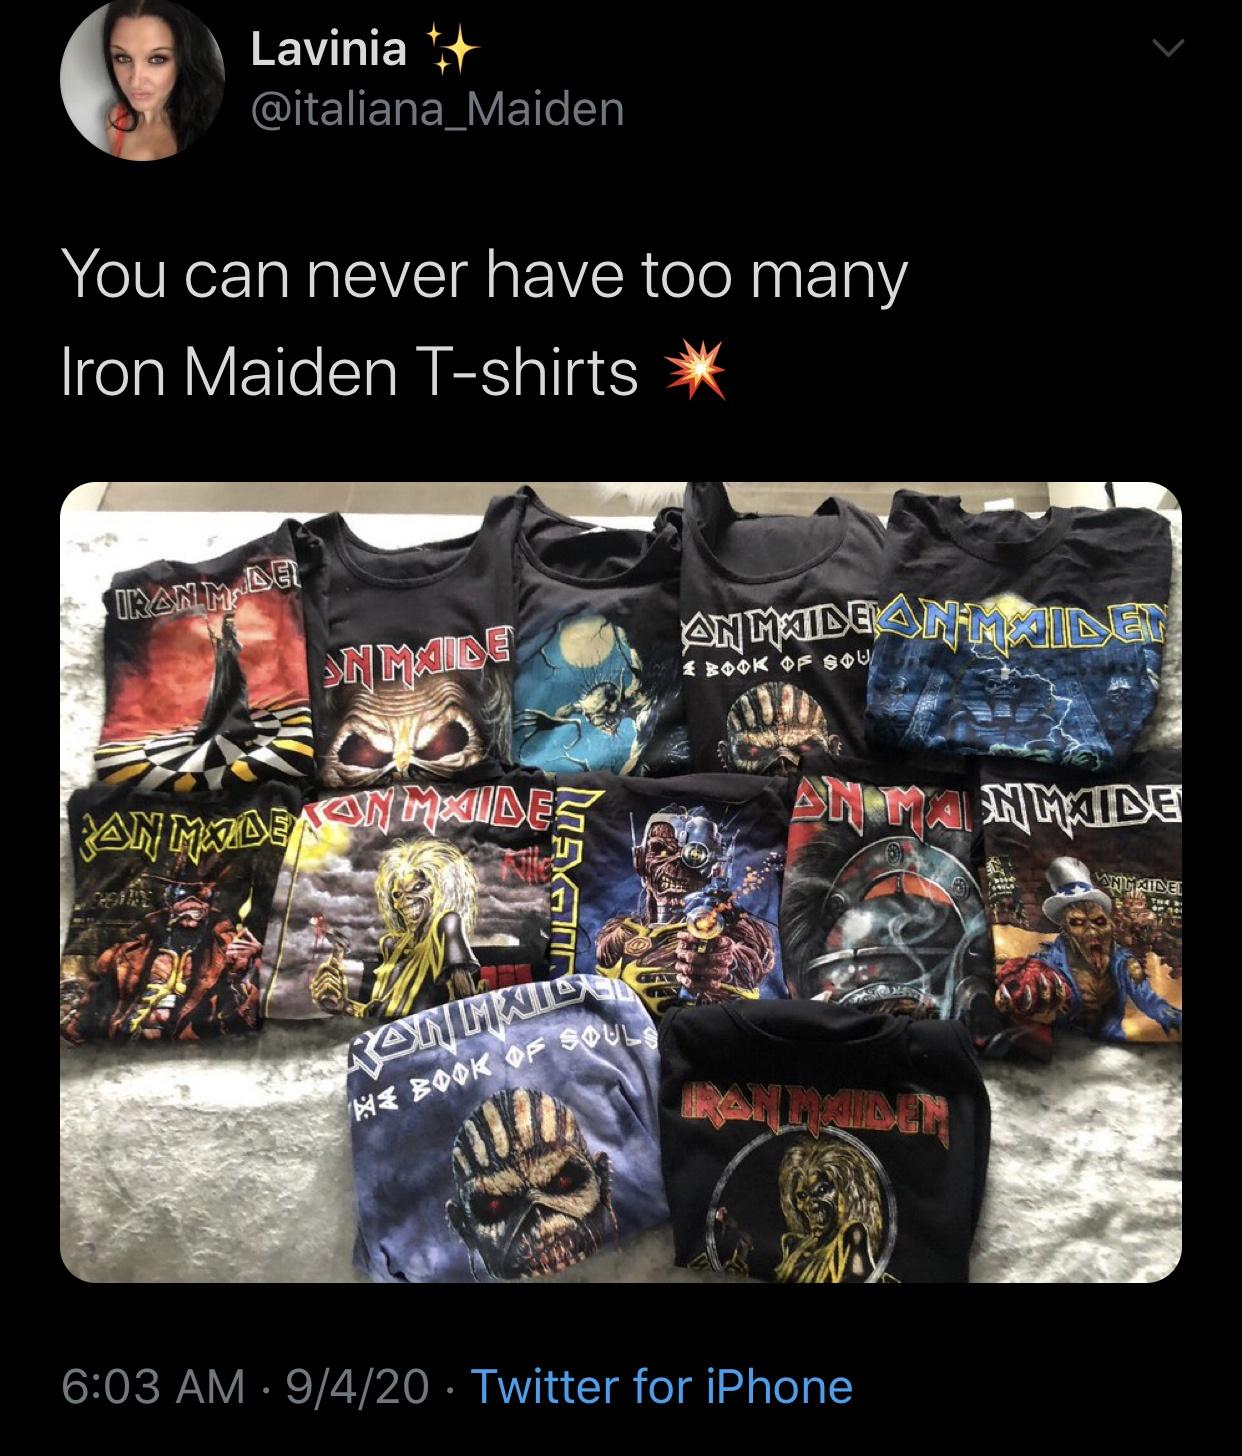 He Book Of Souls Lavinia You can never have too many Iron Maiden Tshirts Iranm Del Anmaideanning Nmide 4 Book Of Sou An Ma Inmide Jan Meraeaon Maides Mumide Ranmwto 9420 Twitter for iPhone